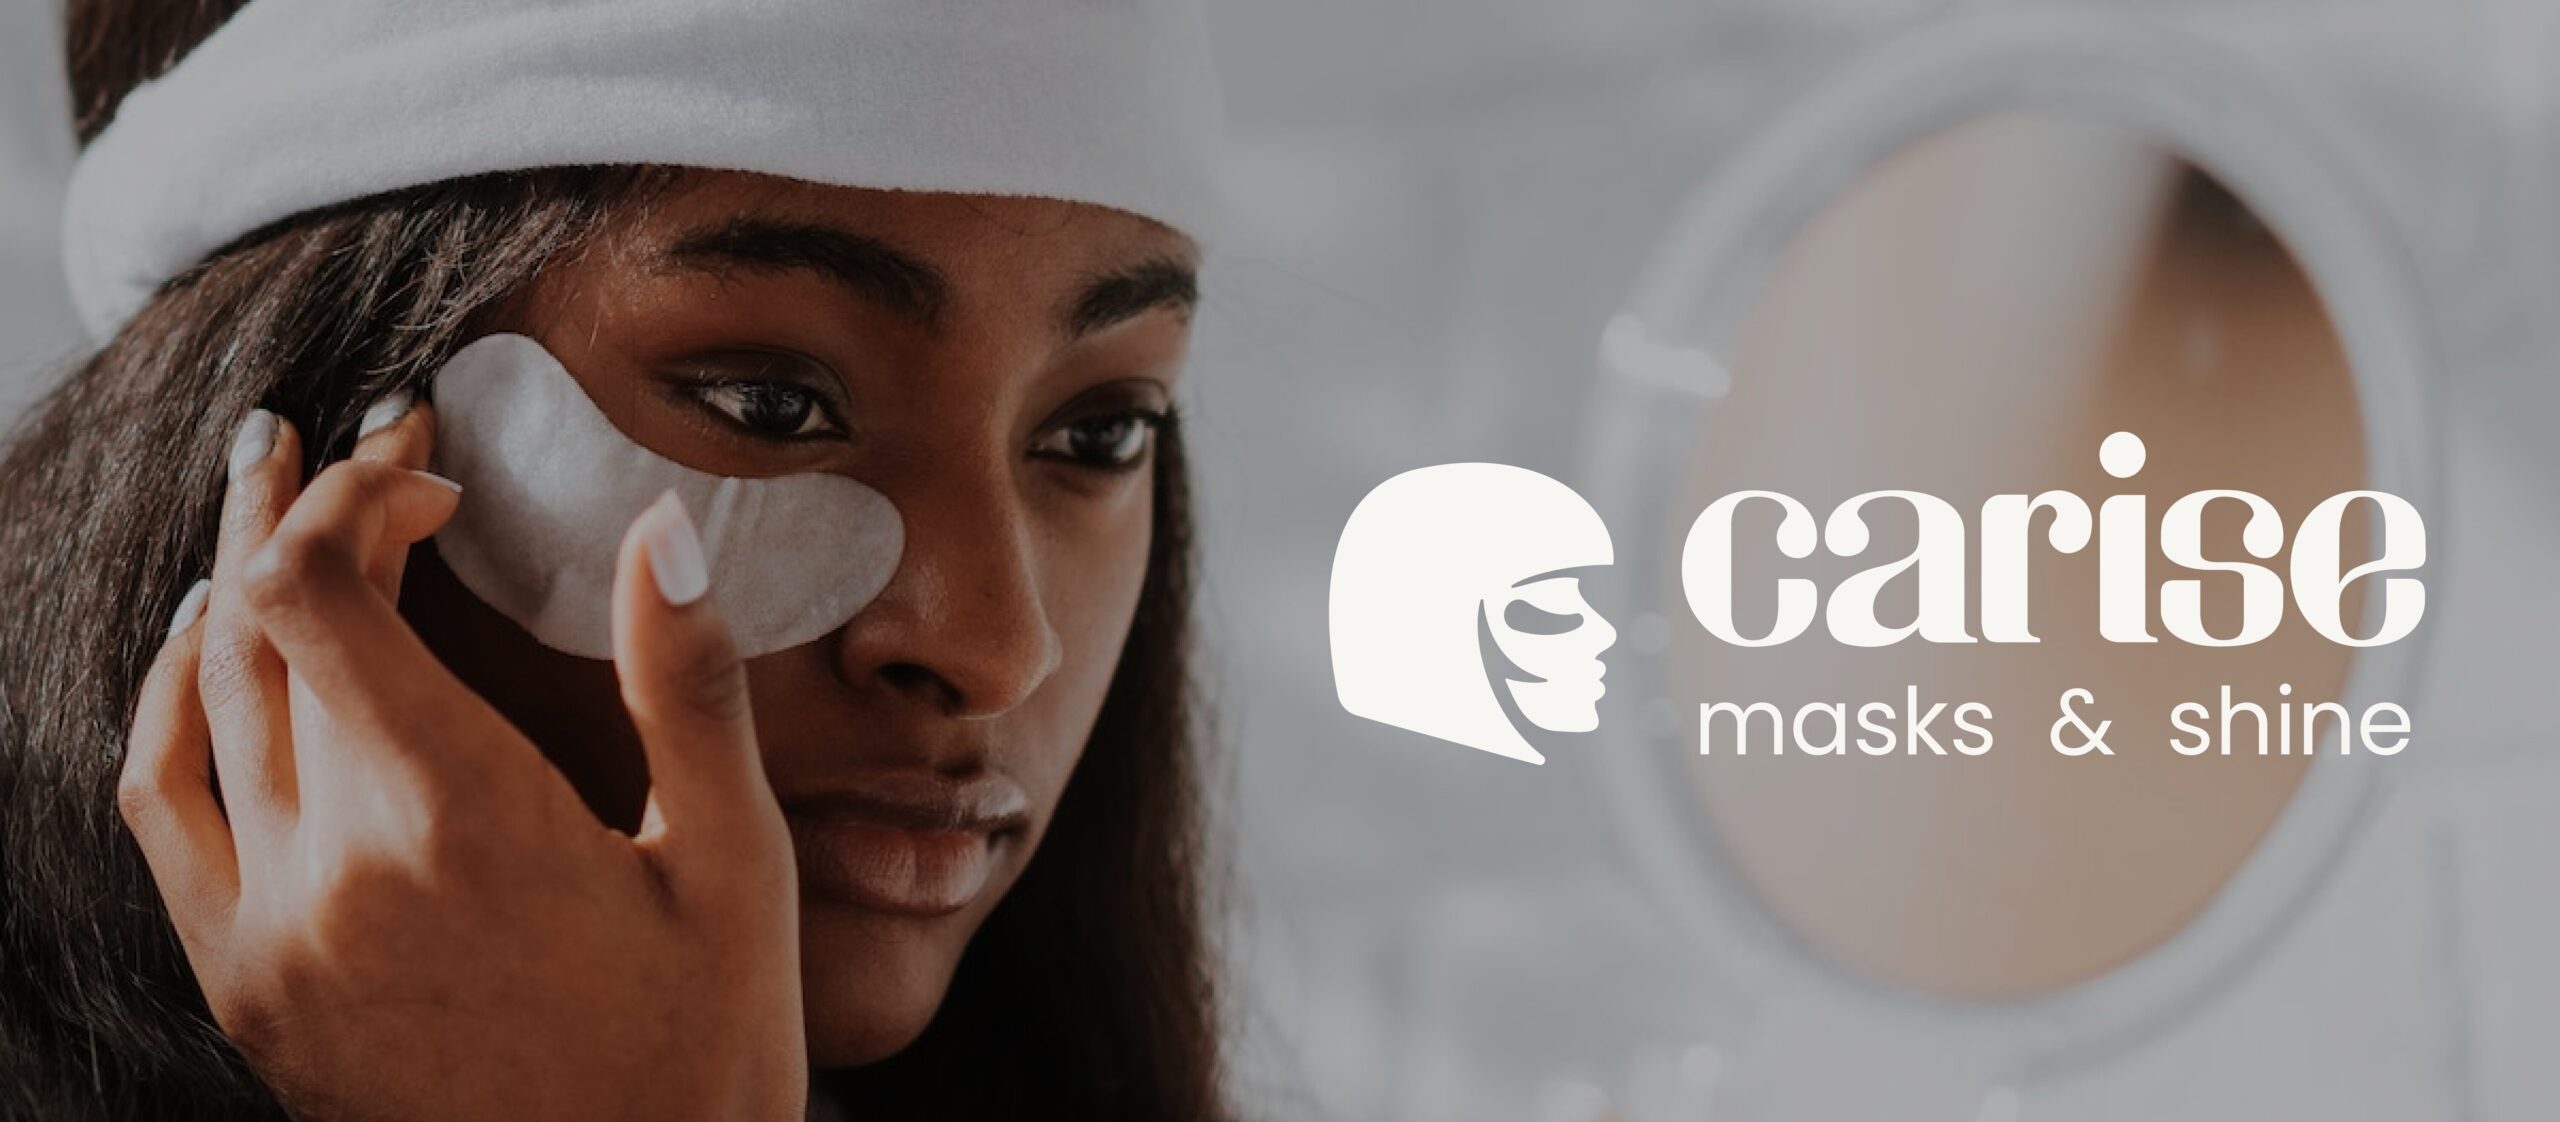 Advertisement of girl using skin care under eye pads and brand name and logo lettering